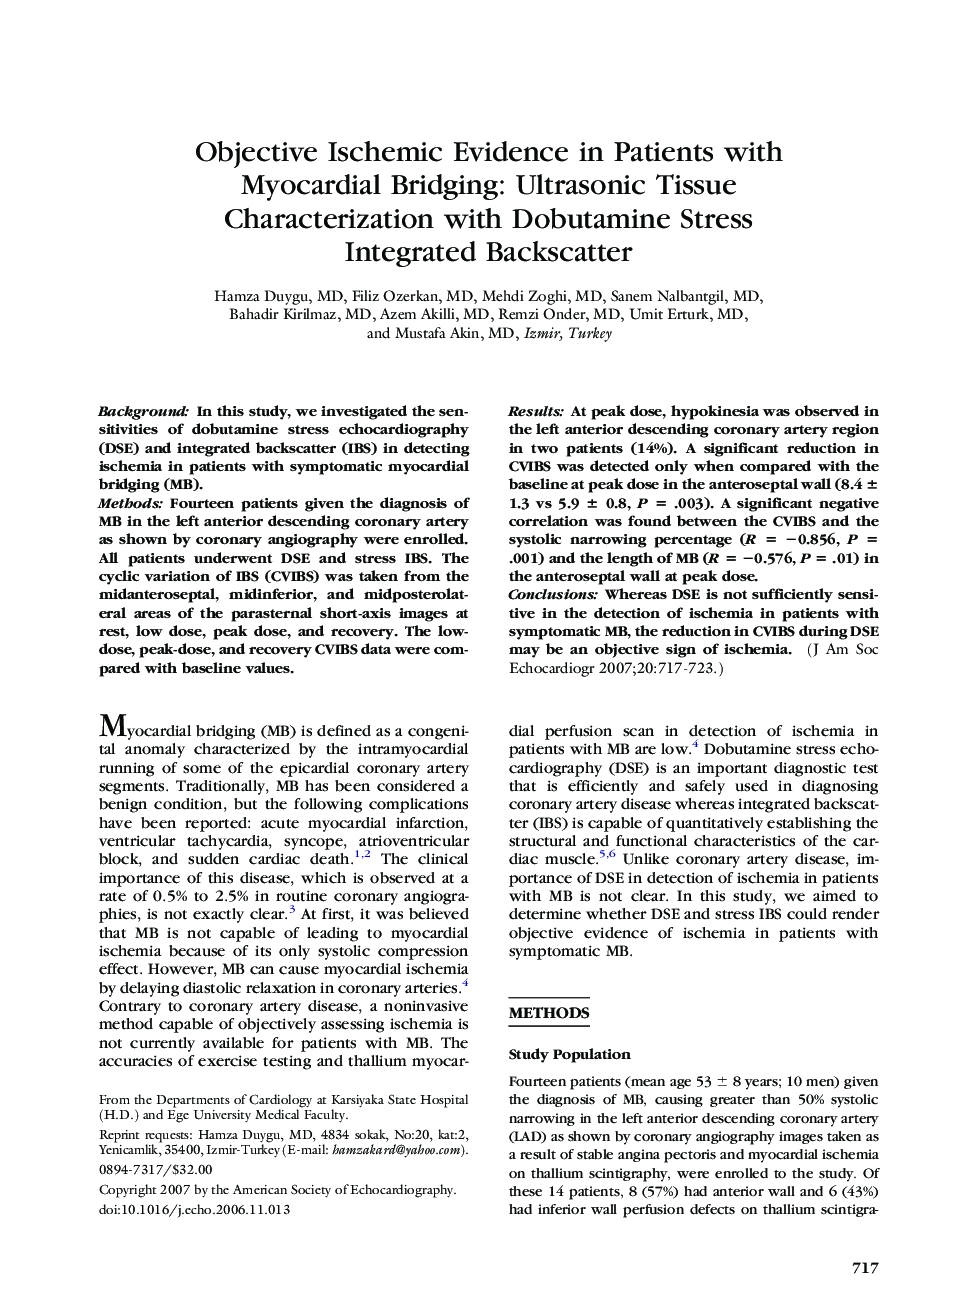 Objective Ischemic Evidence in Patients with Myocardial Bridging: Ultrasonic Tissue Characterization with Dobutamine Stress Integrated Backscatter